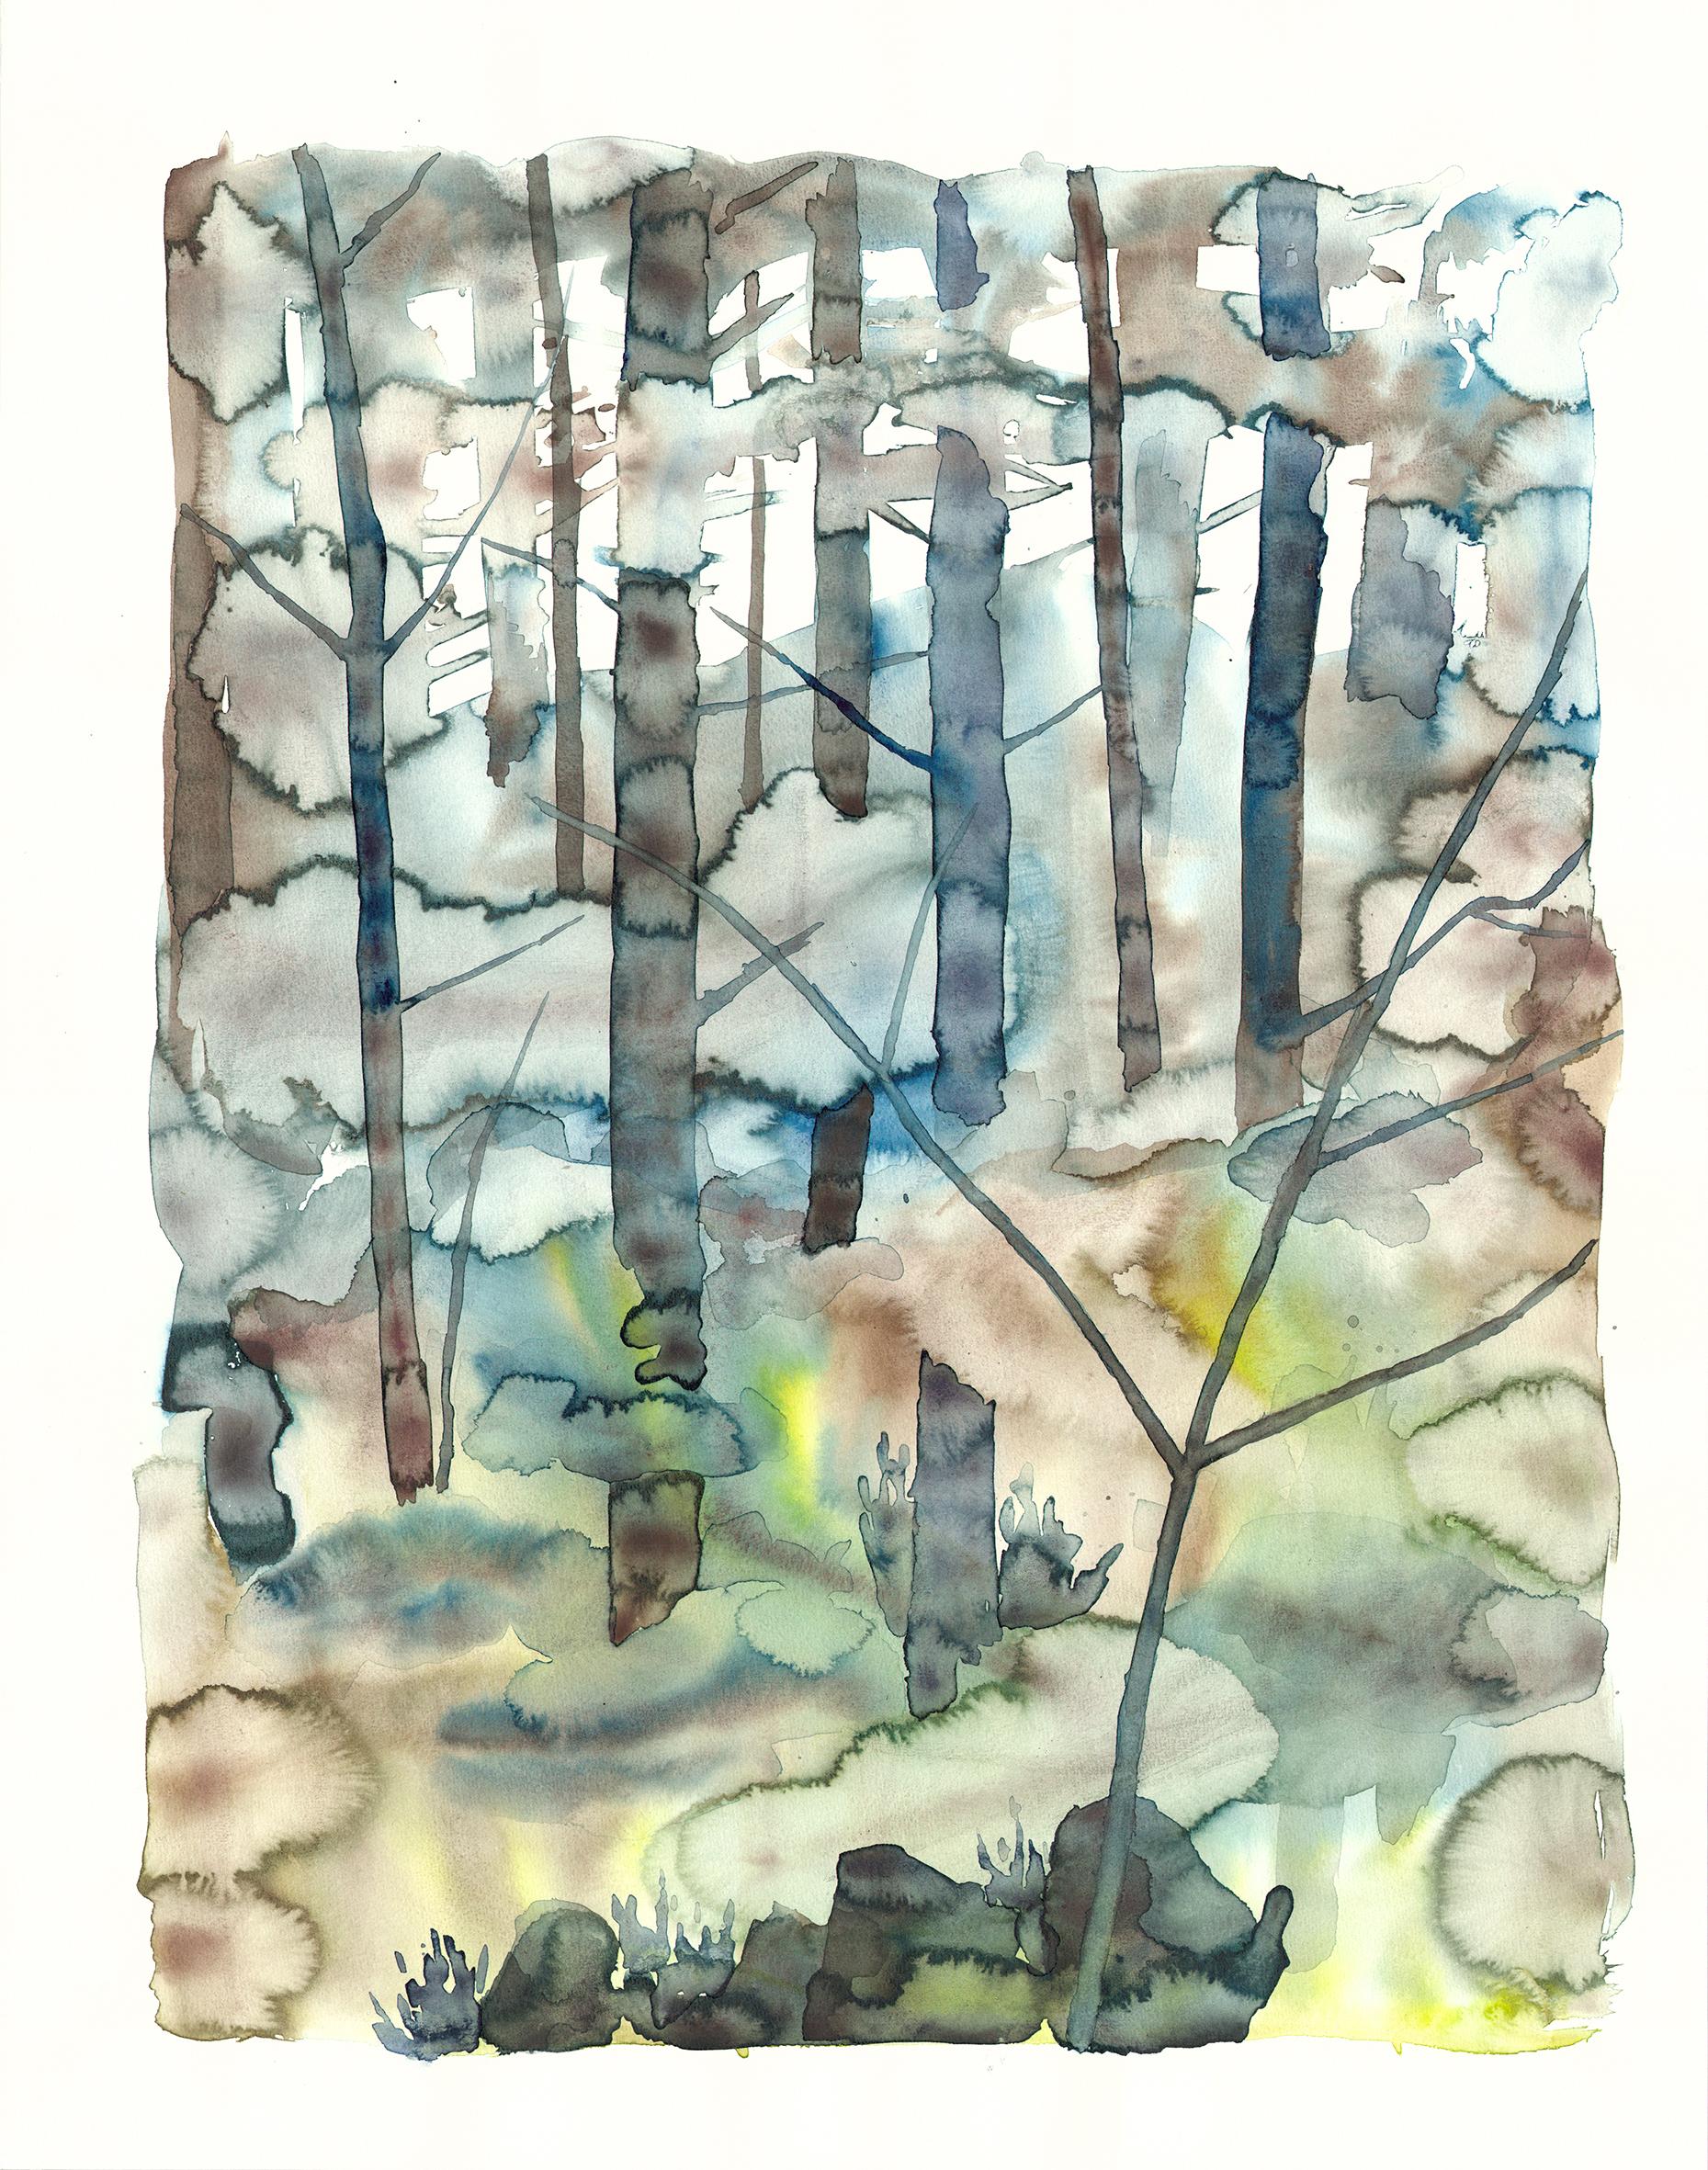 Szilard Huszank
IL A NR 13, 2018
Watercolor
25 x 20 inches

Small streams and waterfalls, felled trees and forests are the revered subjects in landscapes that Huszank explores with vibrant, near-psychedelic colors. The oils are spread thick in long